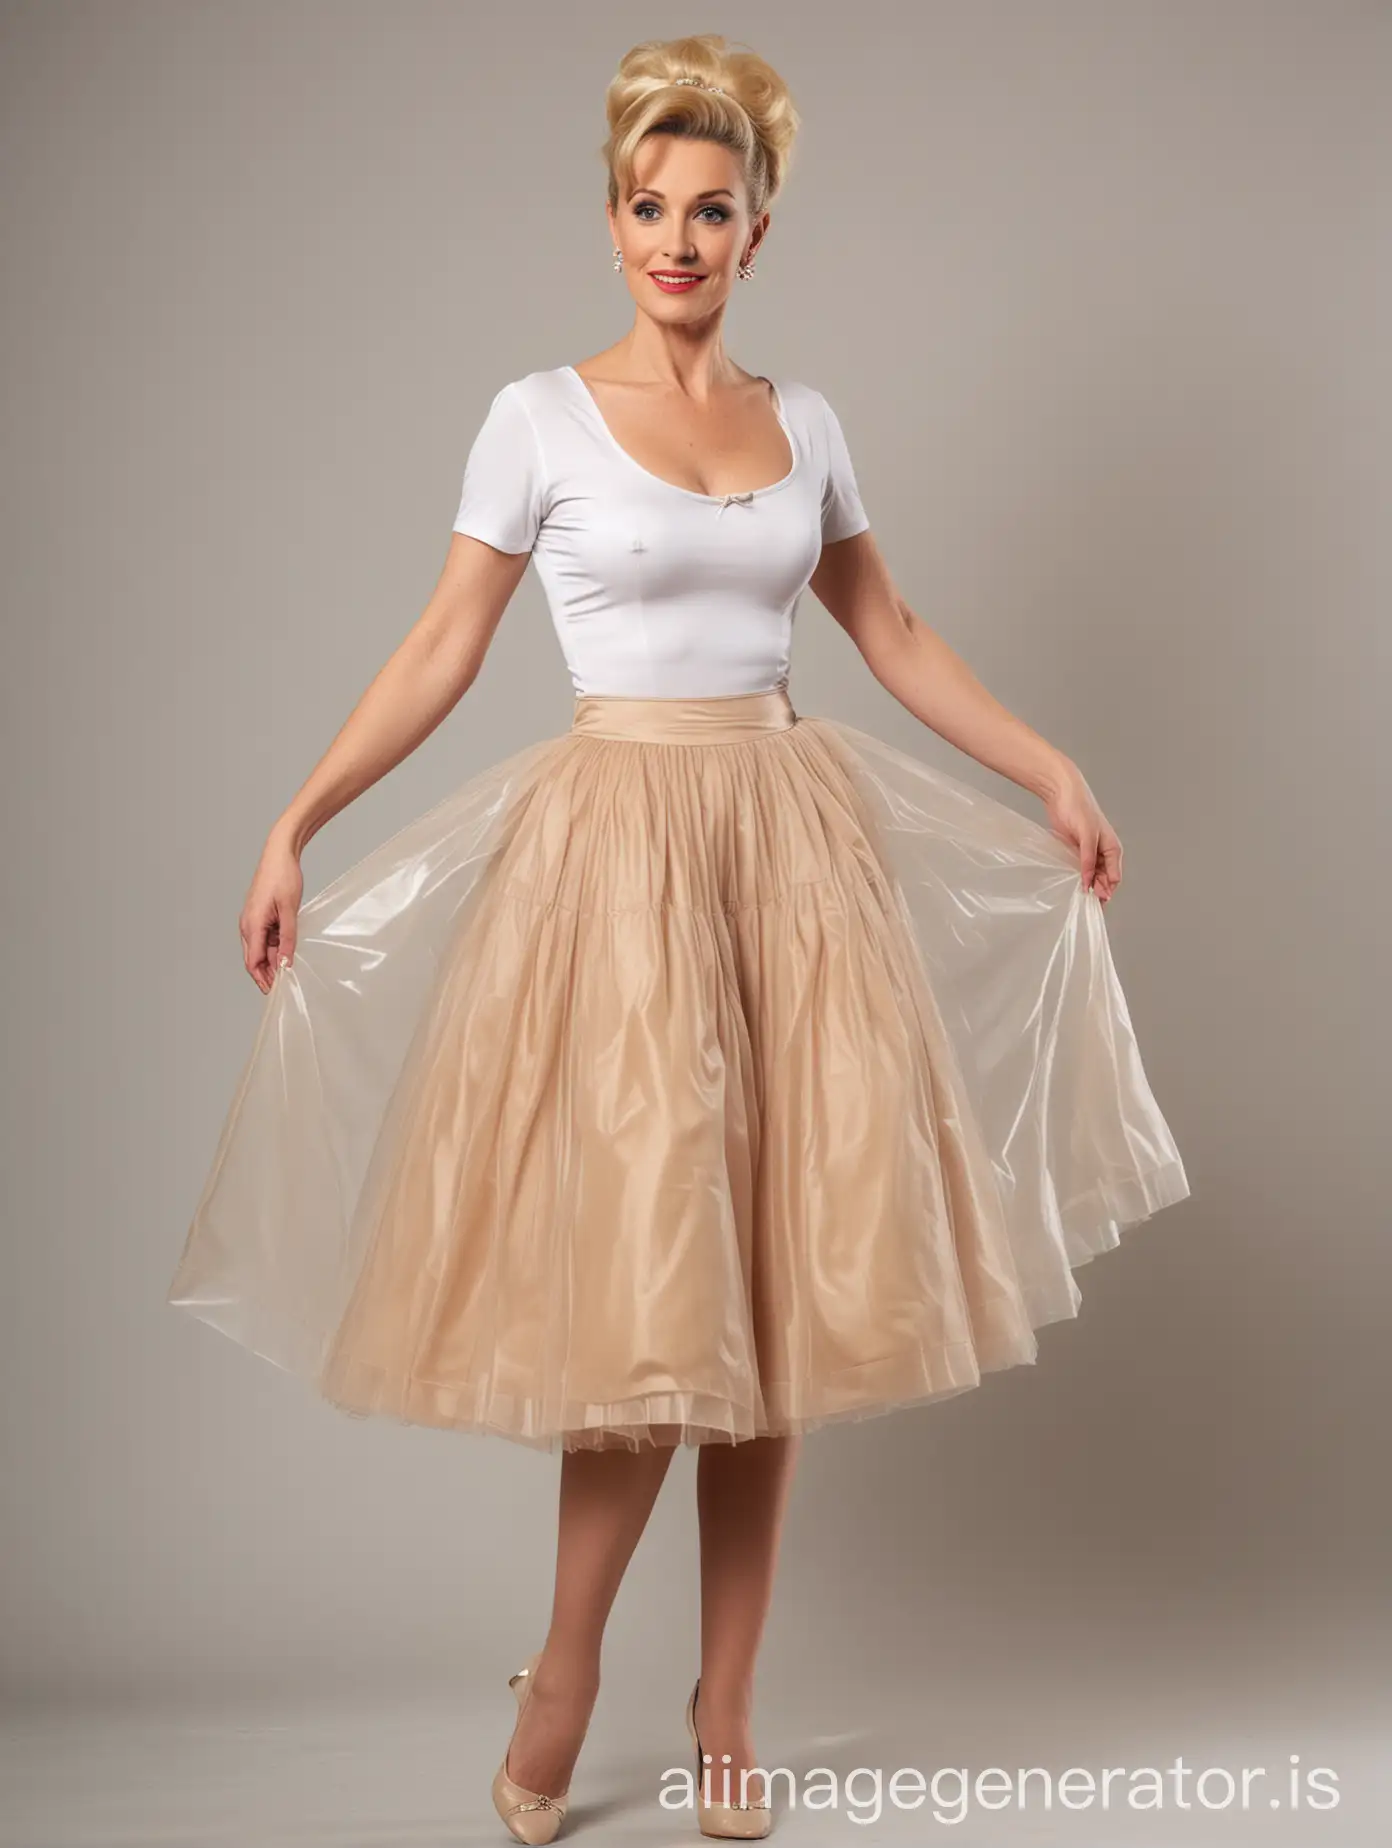 ankle-length fifties bouffante nude sheer bouffant petticoat, worn by a 40-year-old lady with matching control shapewear with underwired cups